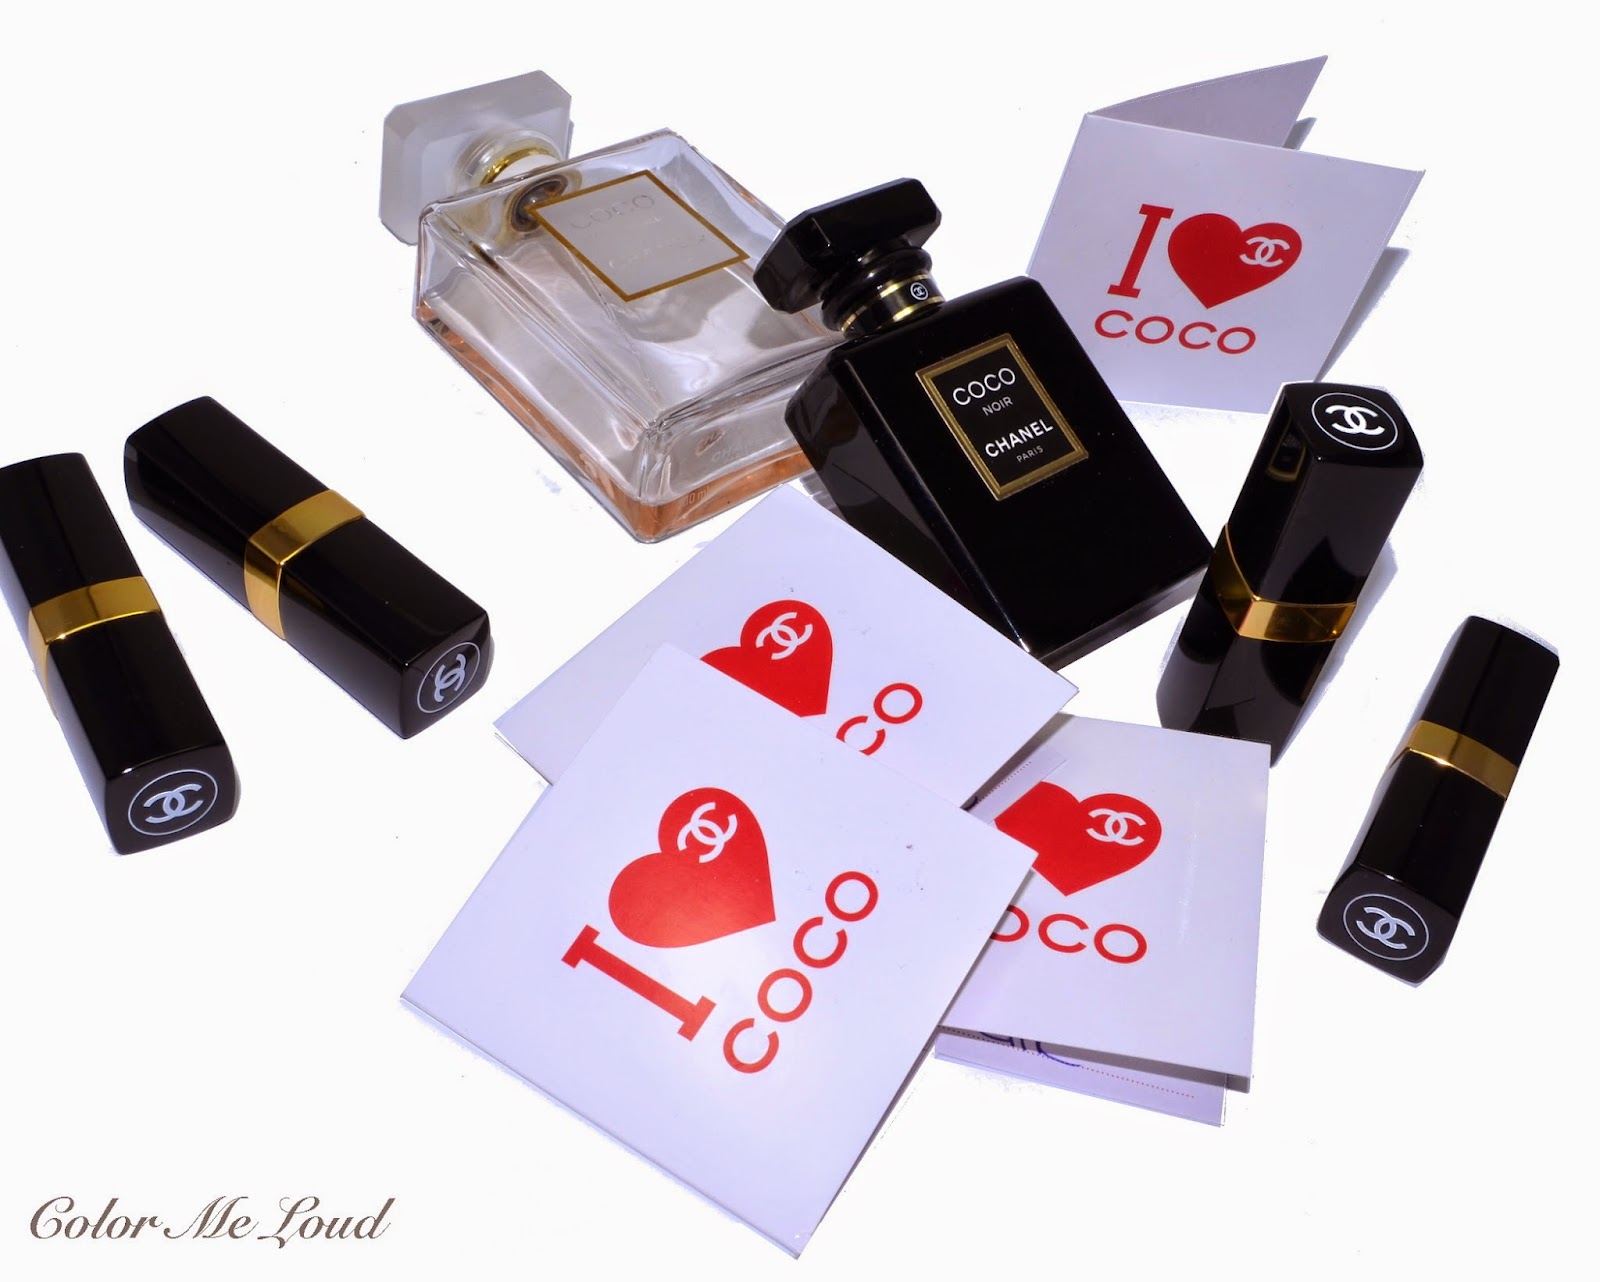 CHANEL Coco Noir Review  An All-Time Fave! 